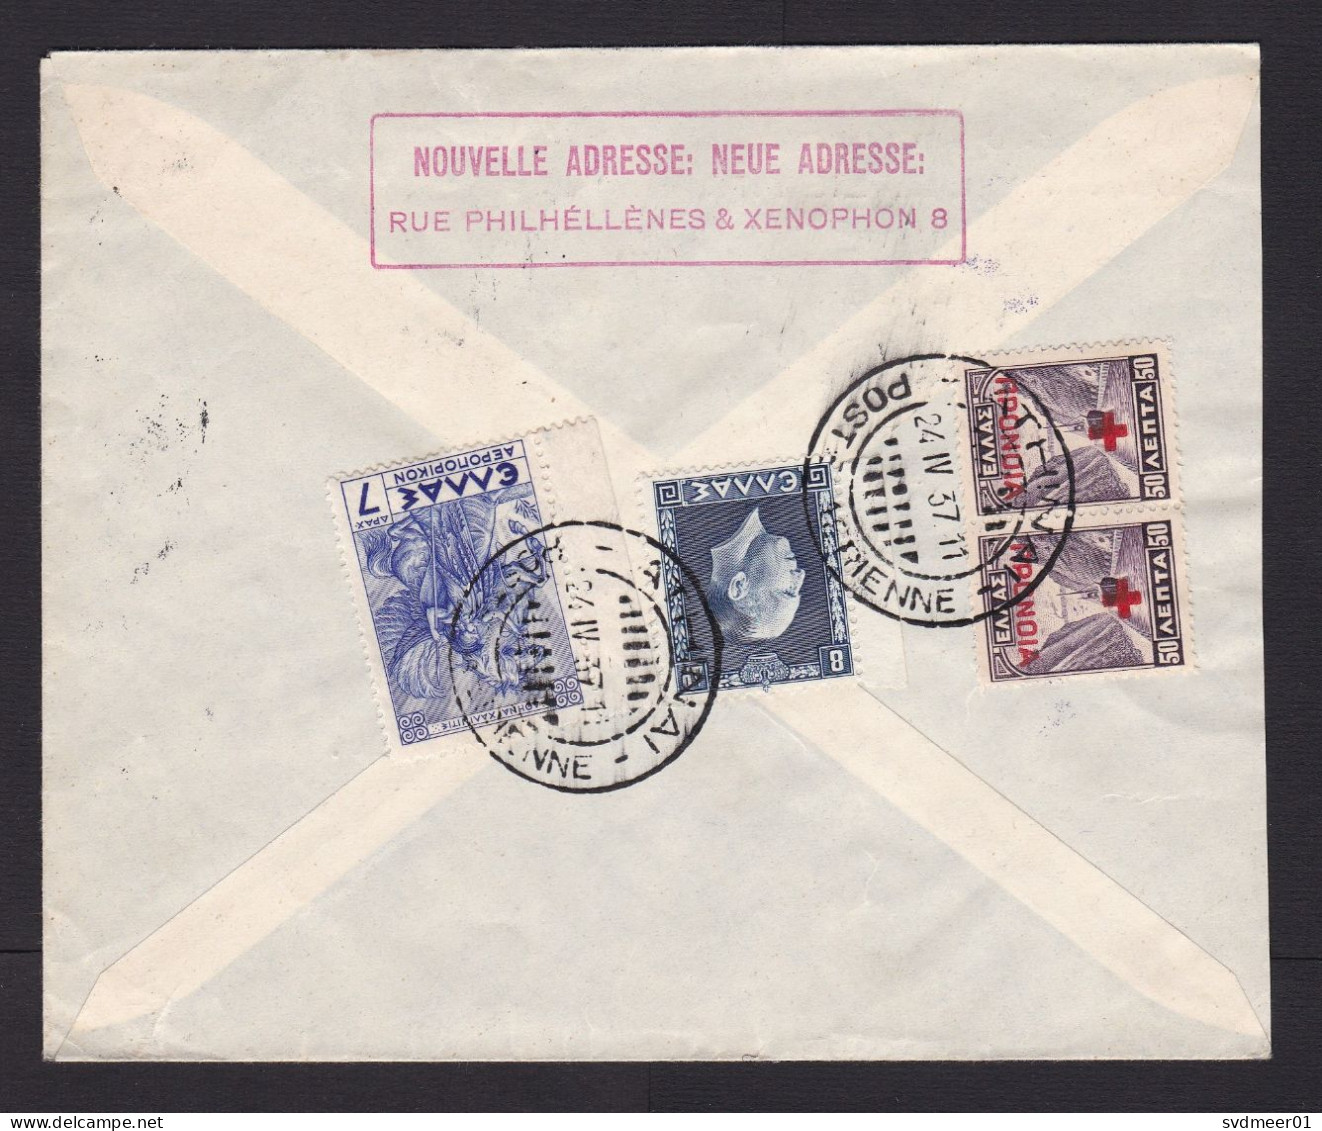 Greece: Airmail Cover To Germany, 1937, 4 Stamps, Overprint Red Cross, Purple Bar Jusqu'a Air Cancel (traces Of Use) - Covers & Documents